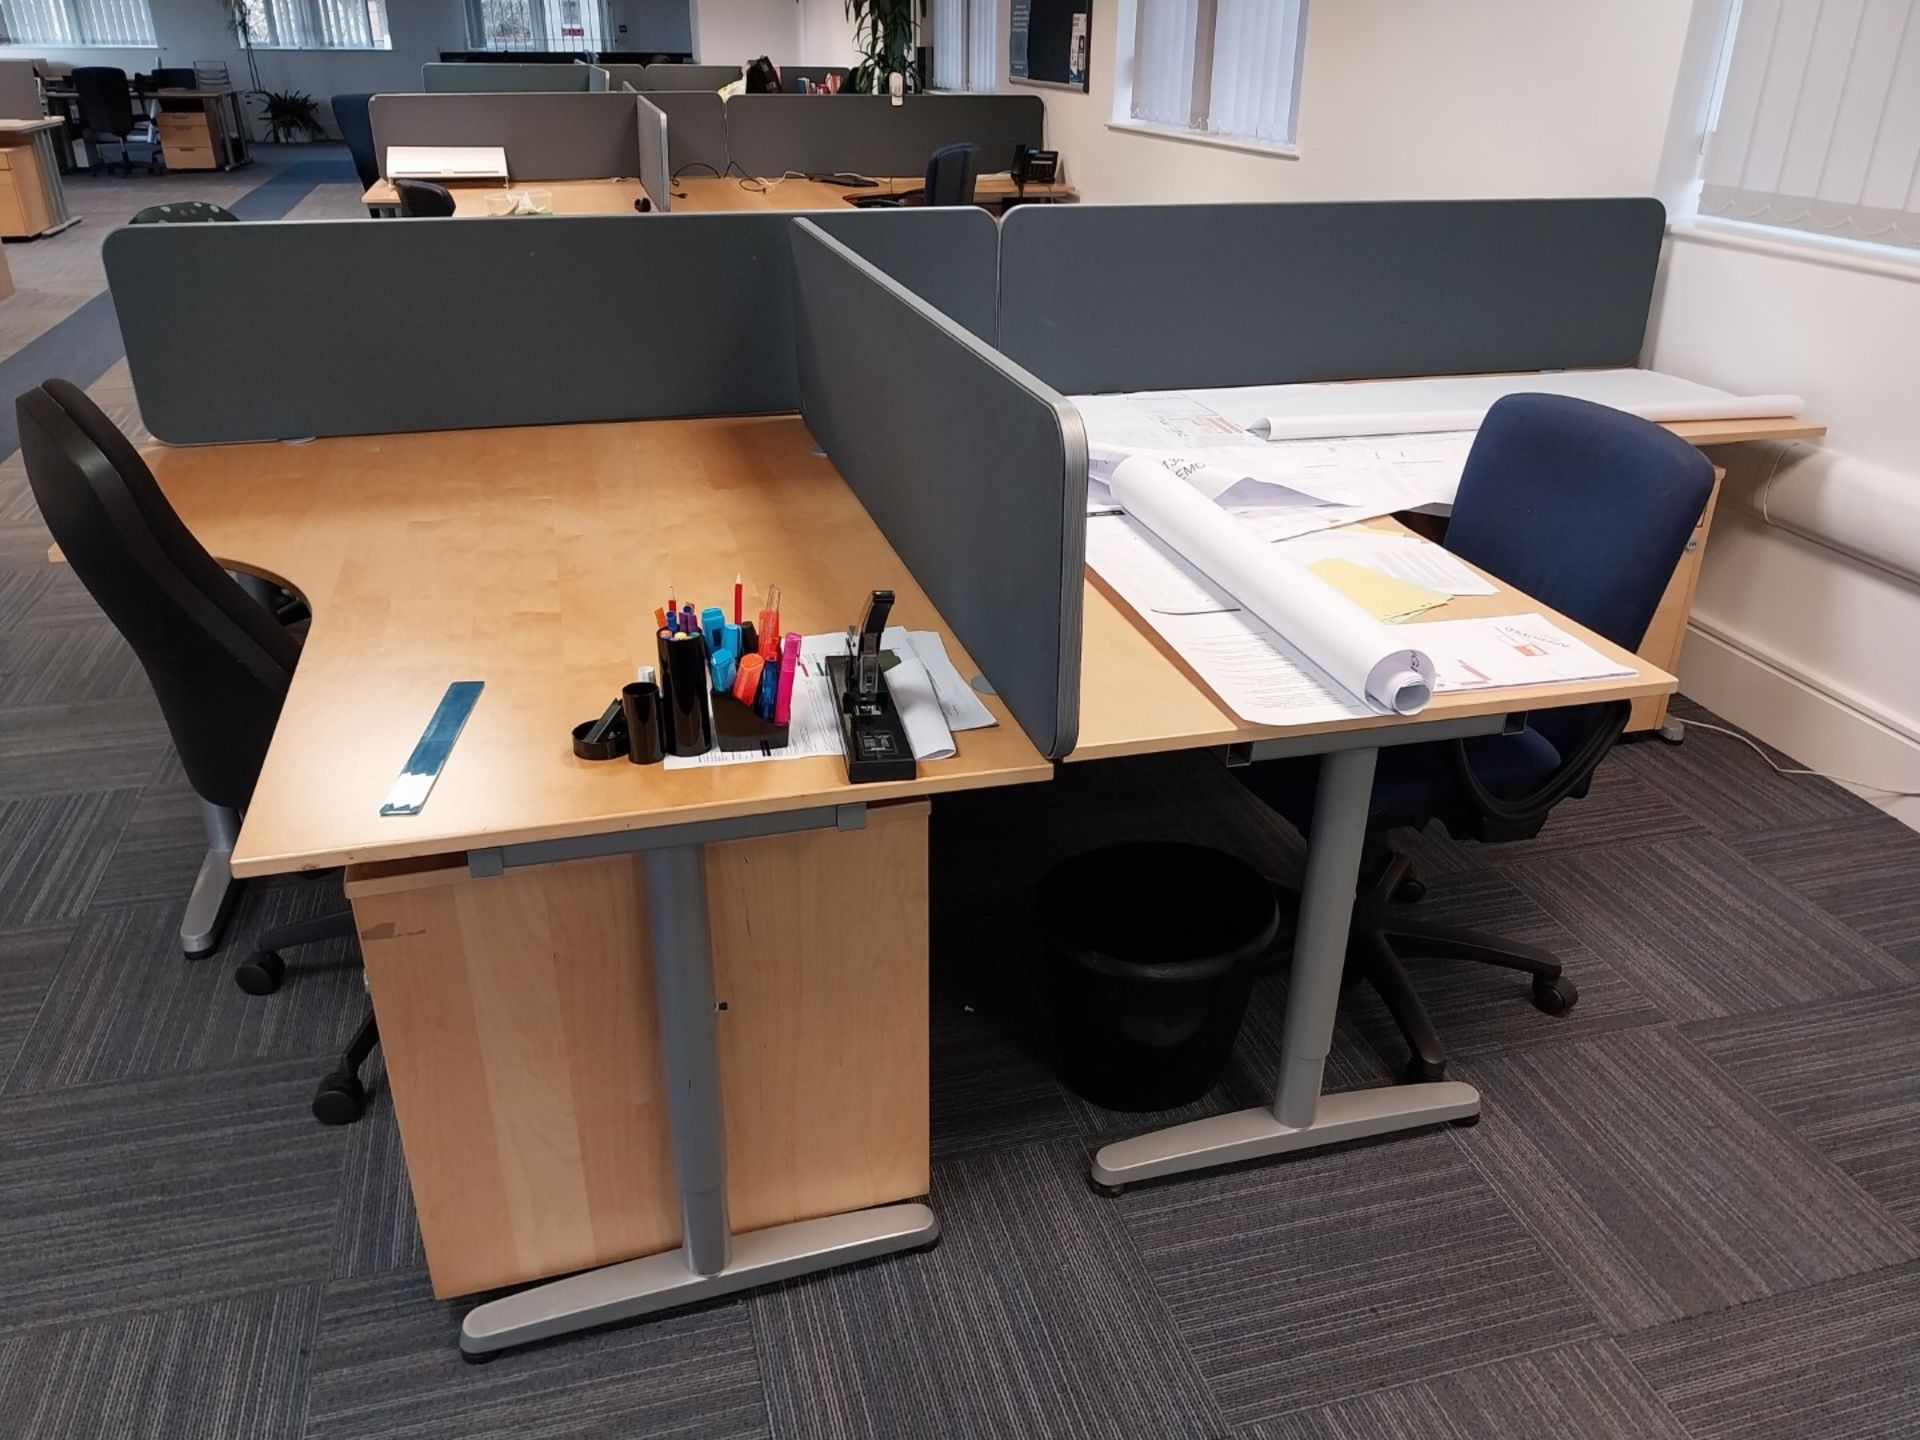 4 x curved office desks 1600mm(w) x 1200mm(d), 4 x - Image 3 of 4